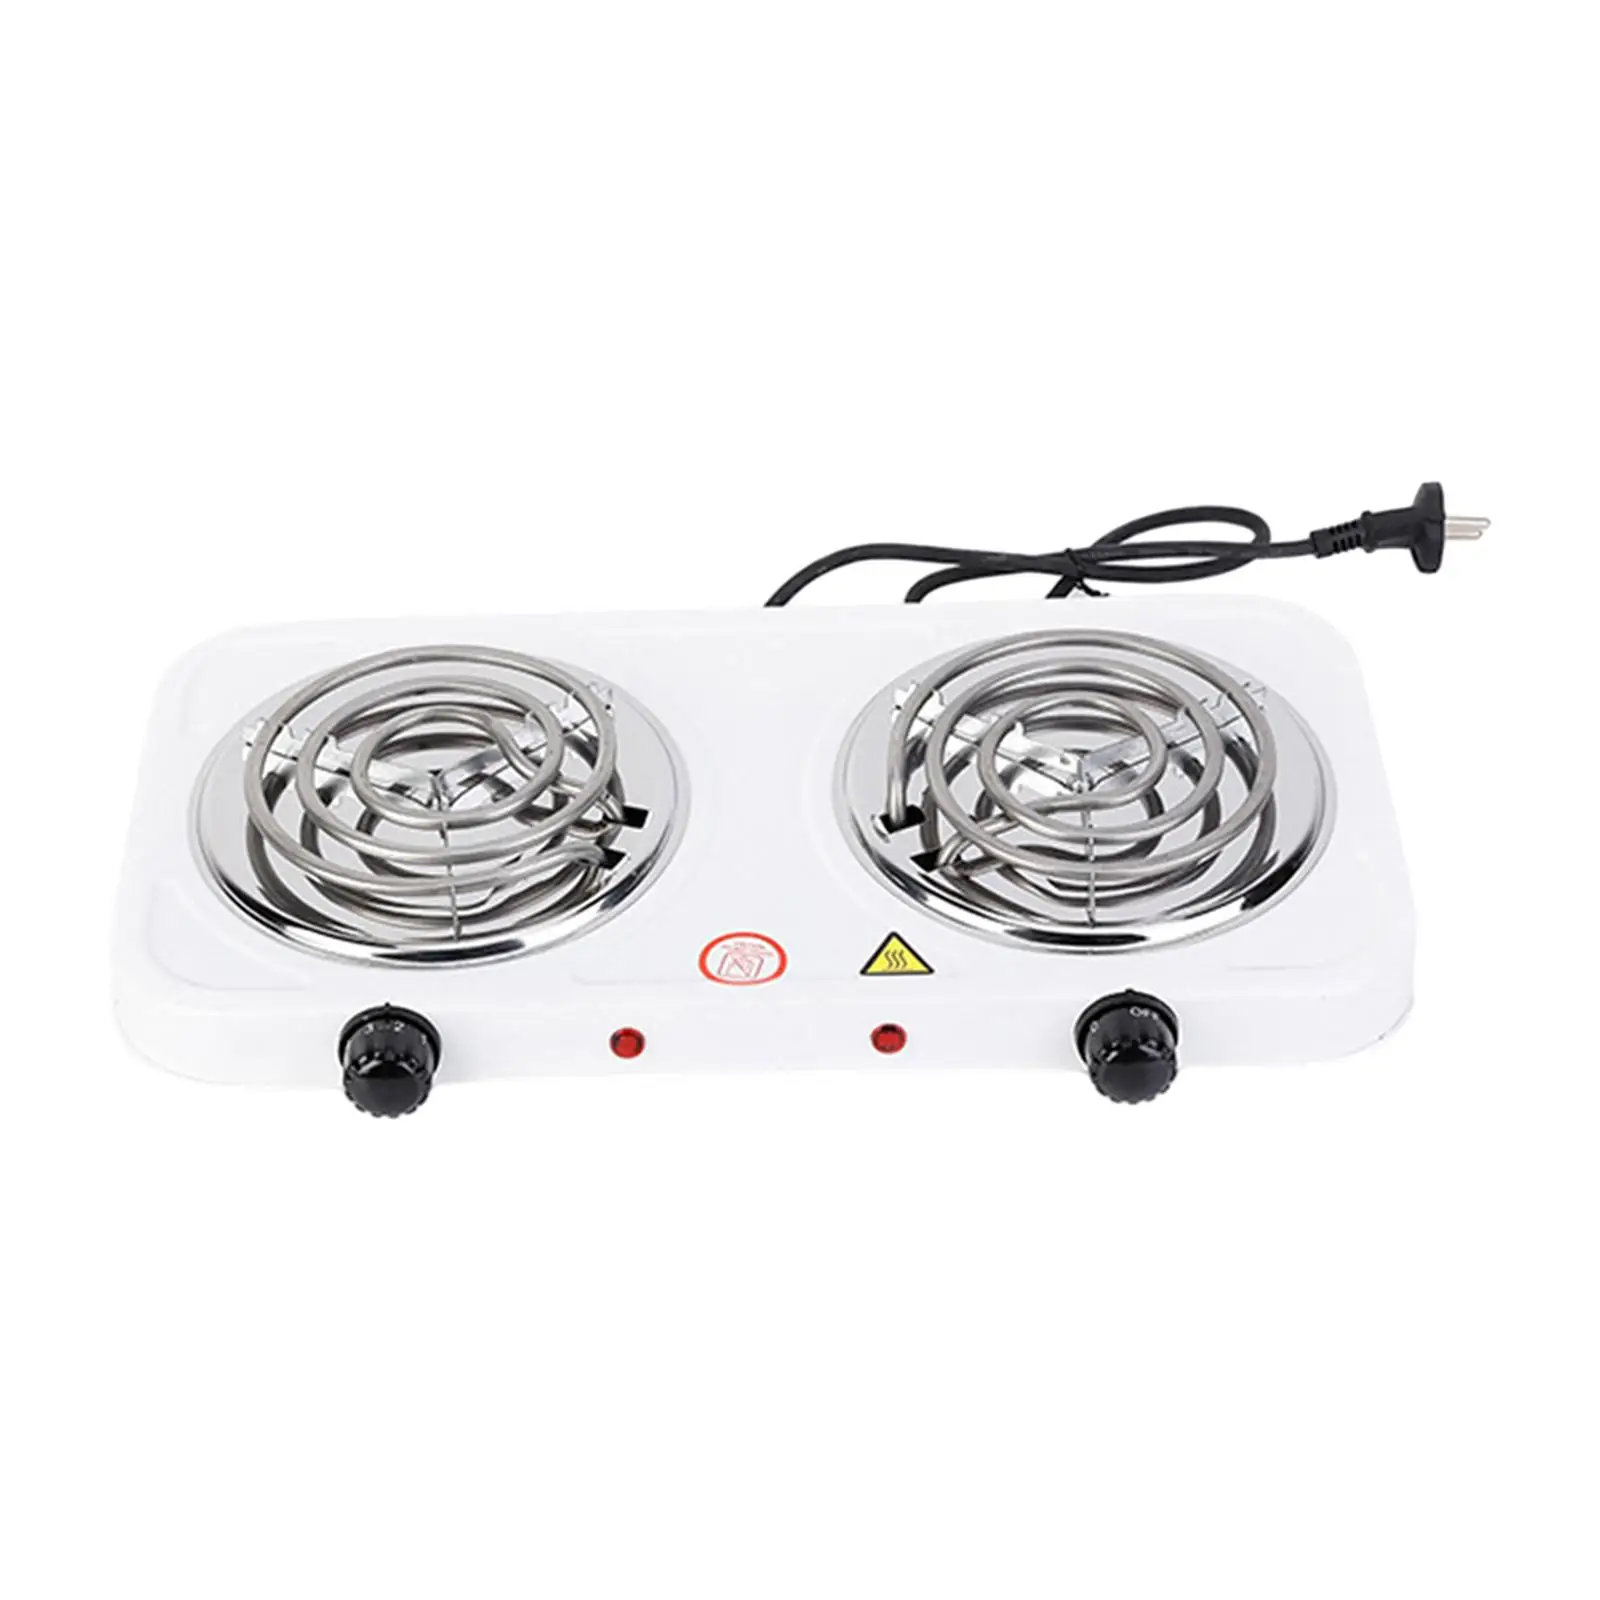 Double Burner Cooktop with 5 Level Temperature Control for Home, Camping, Party Home Outdoor White Countertop Burner Convenient